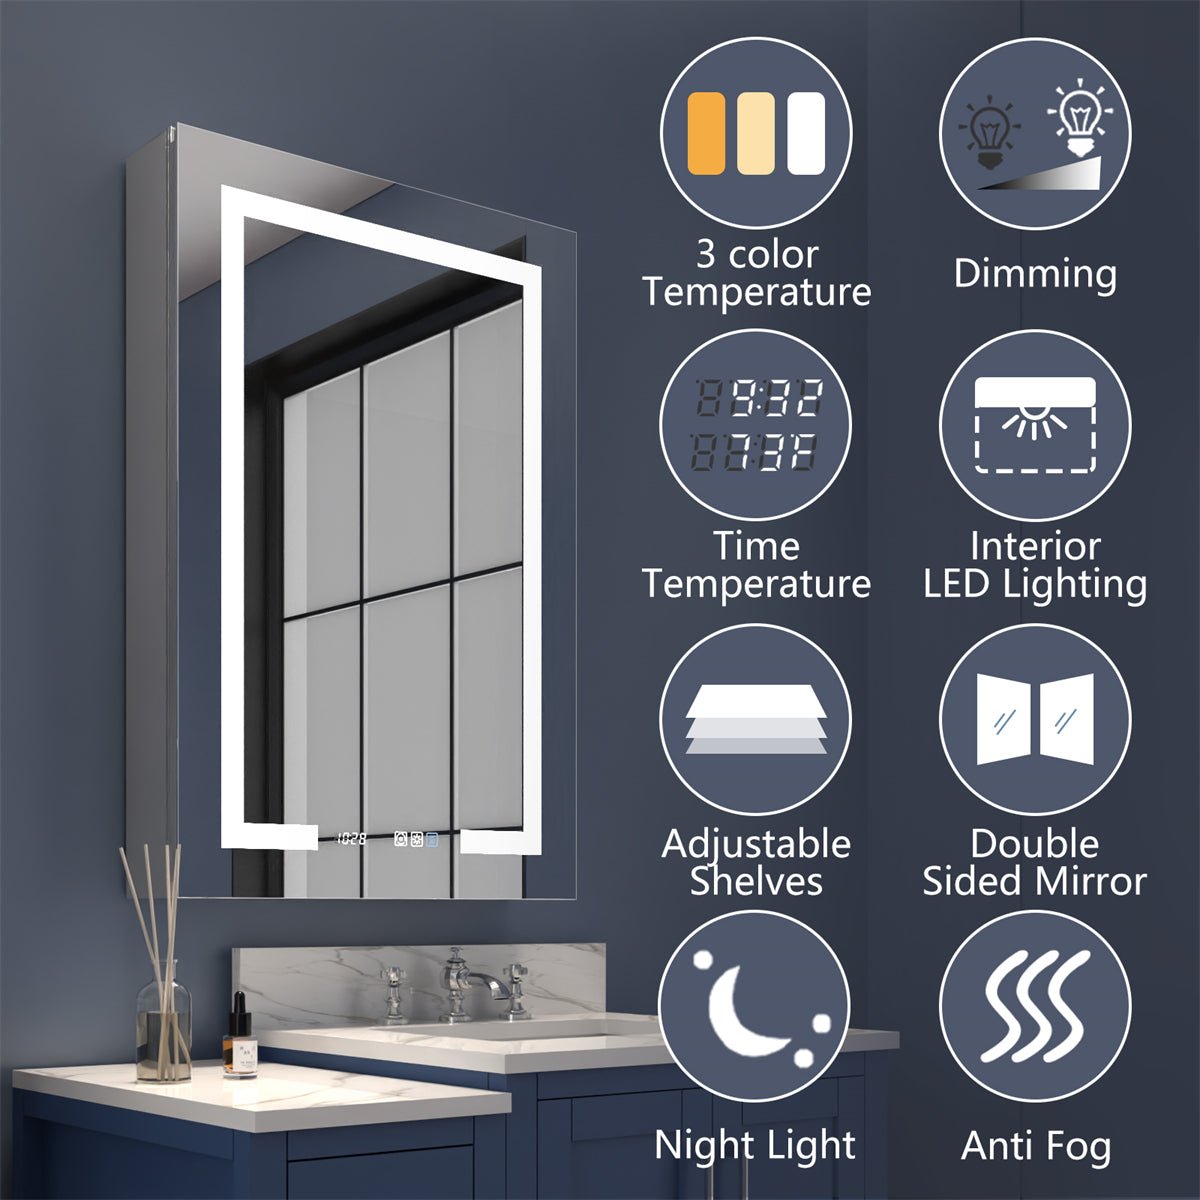 Boost-M2 24" W x 36" H LED Lighted Bathroom Medicine Cabinet with Mirror and Clock - ExBriteUSA